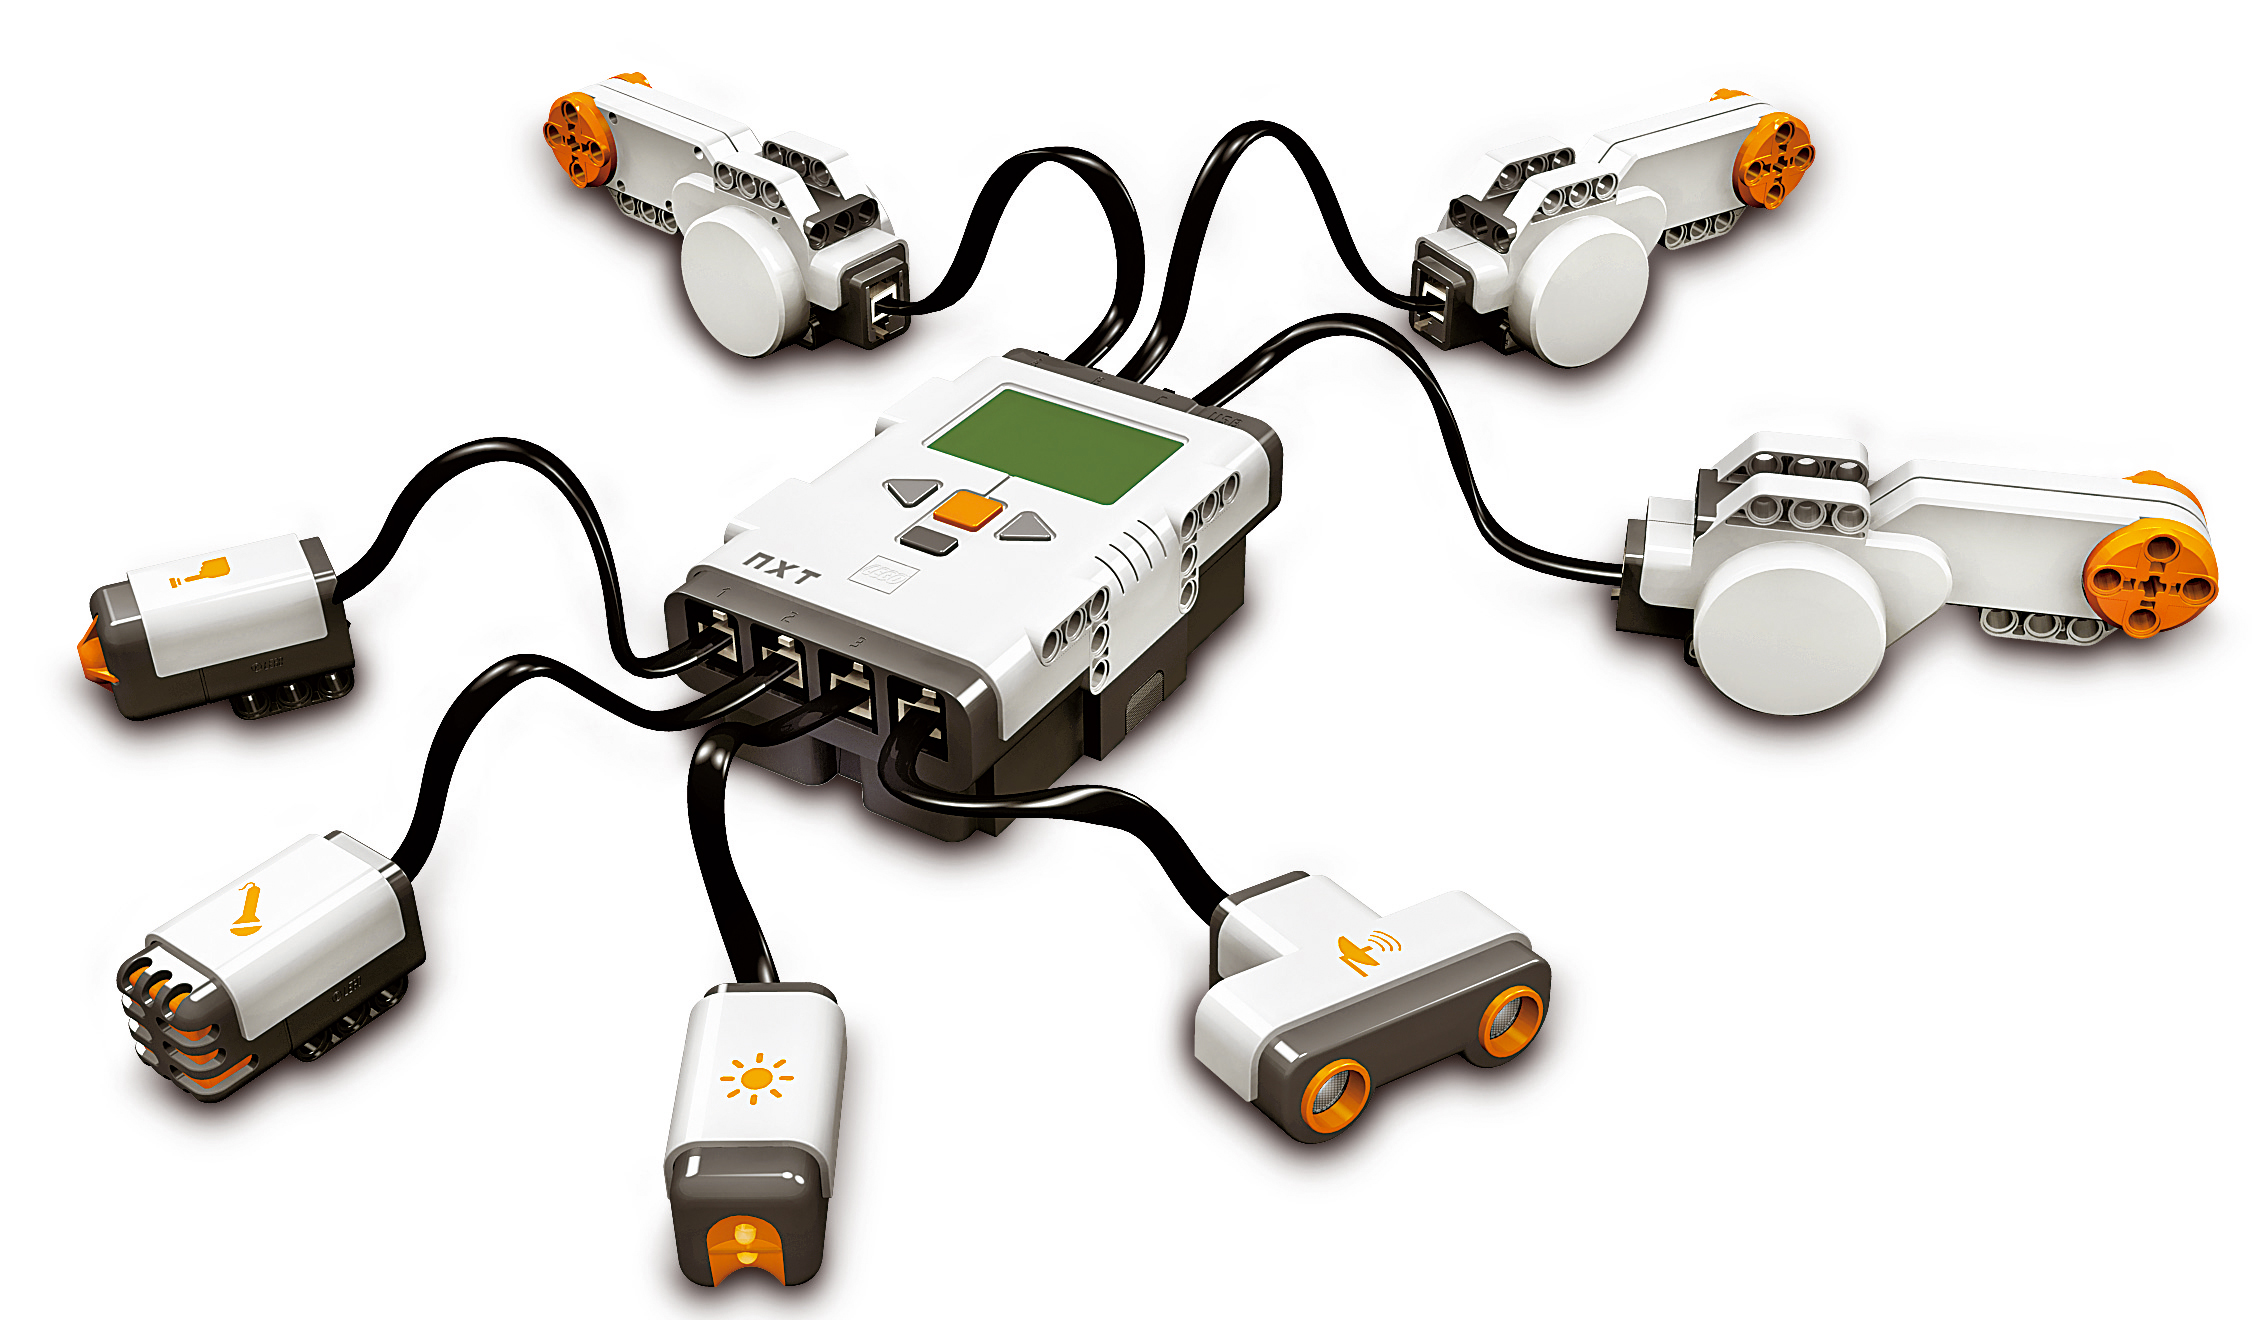 What's NXT? LEGO Group Unveils MINDSTORMS™ NXT Toolset at Consumer Electronics